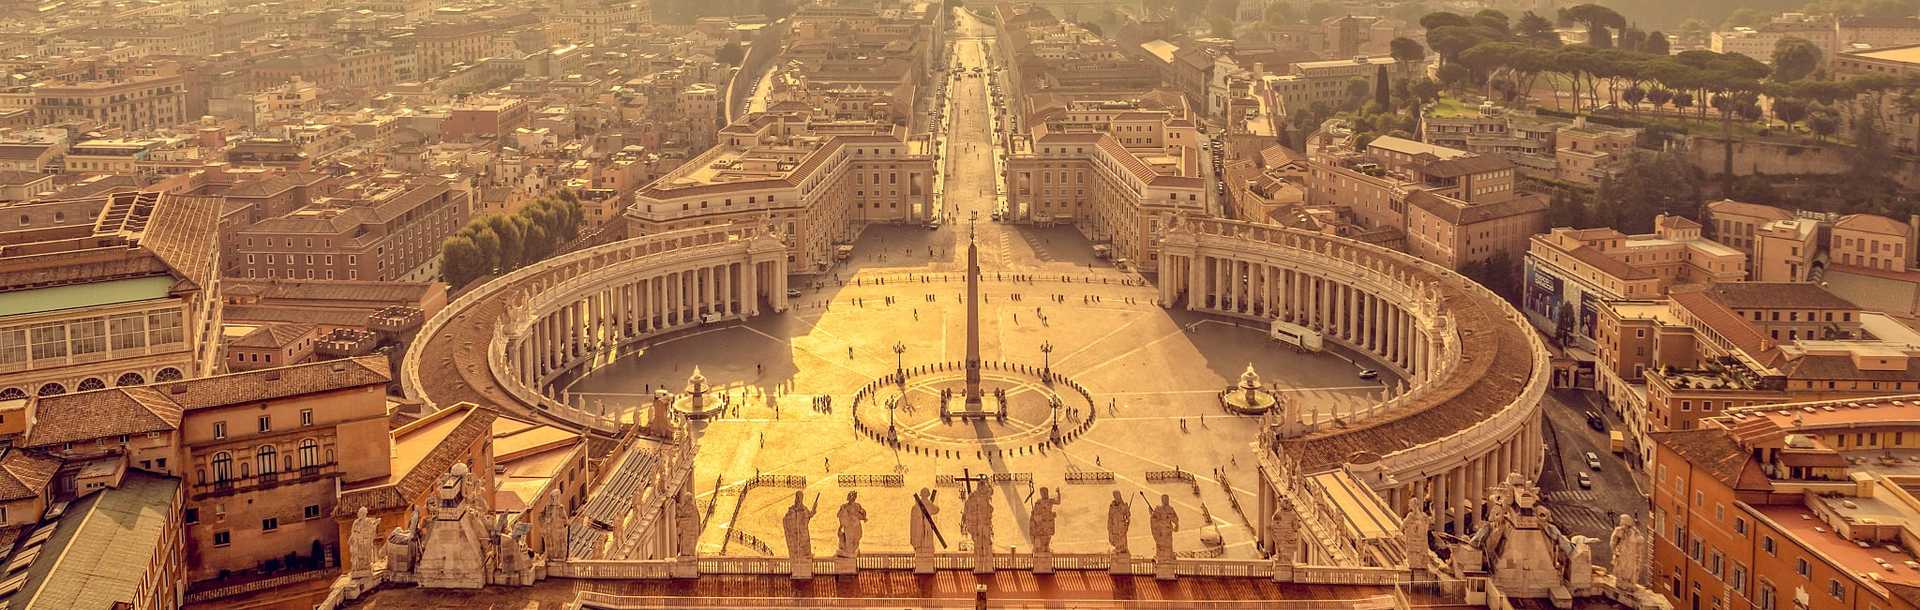 View of St Peter's Square in Vatican City, Rome